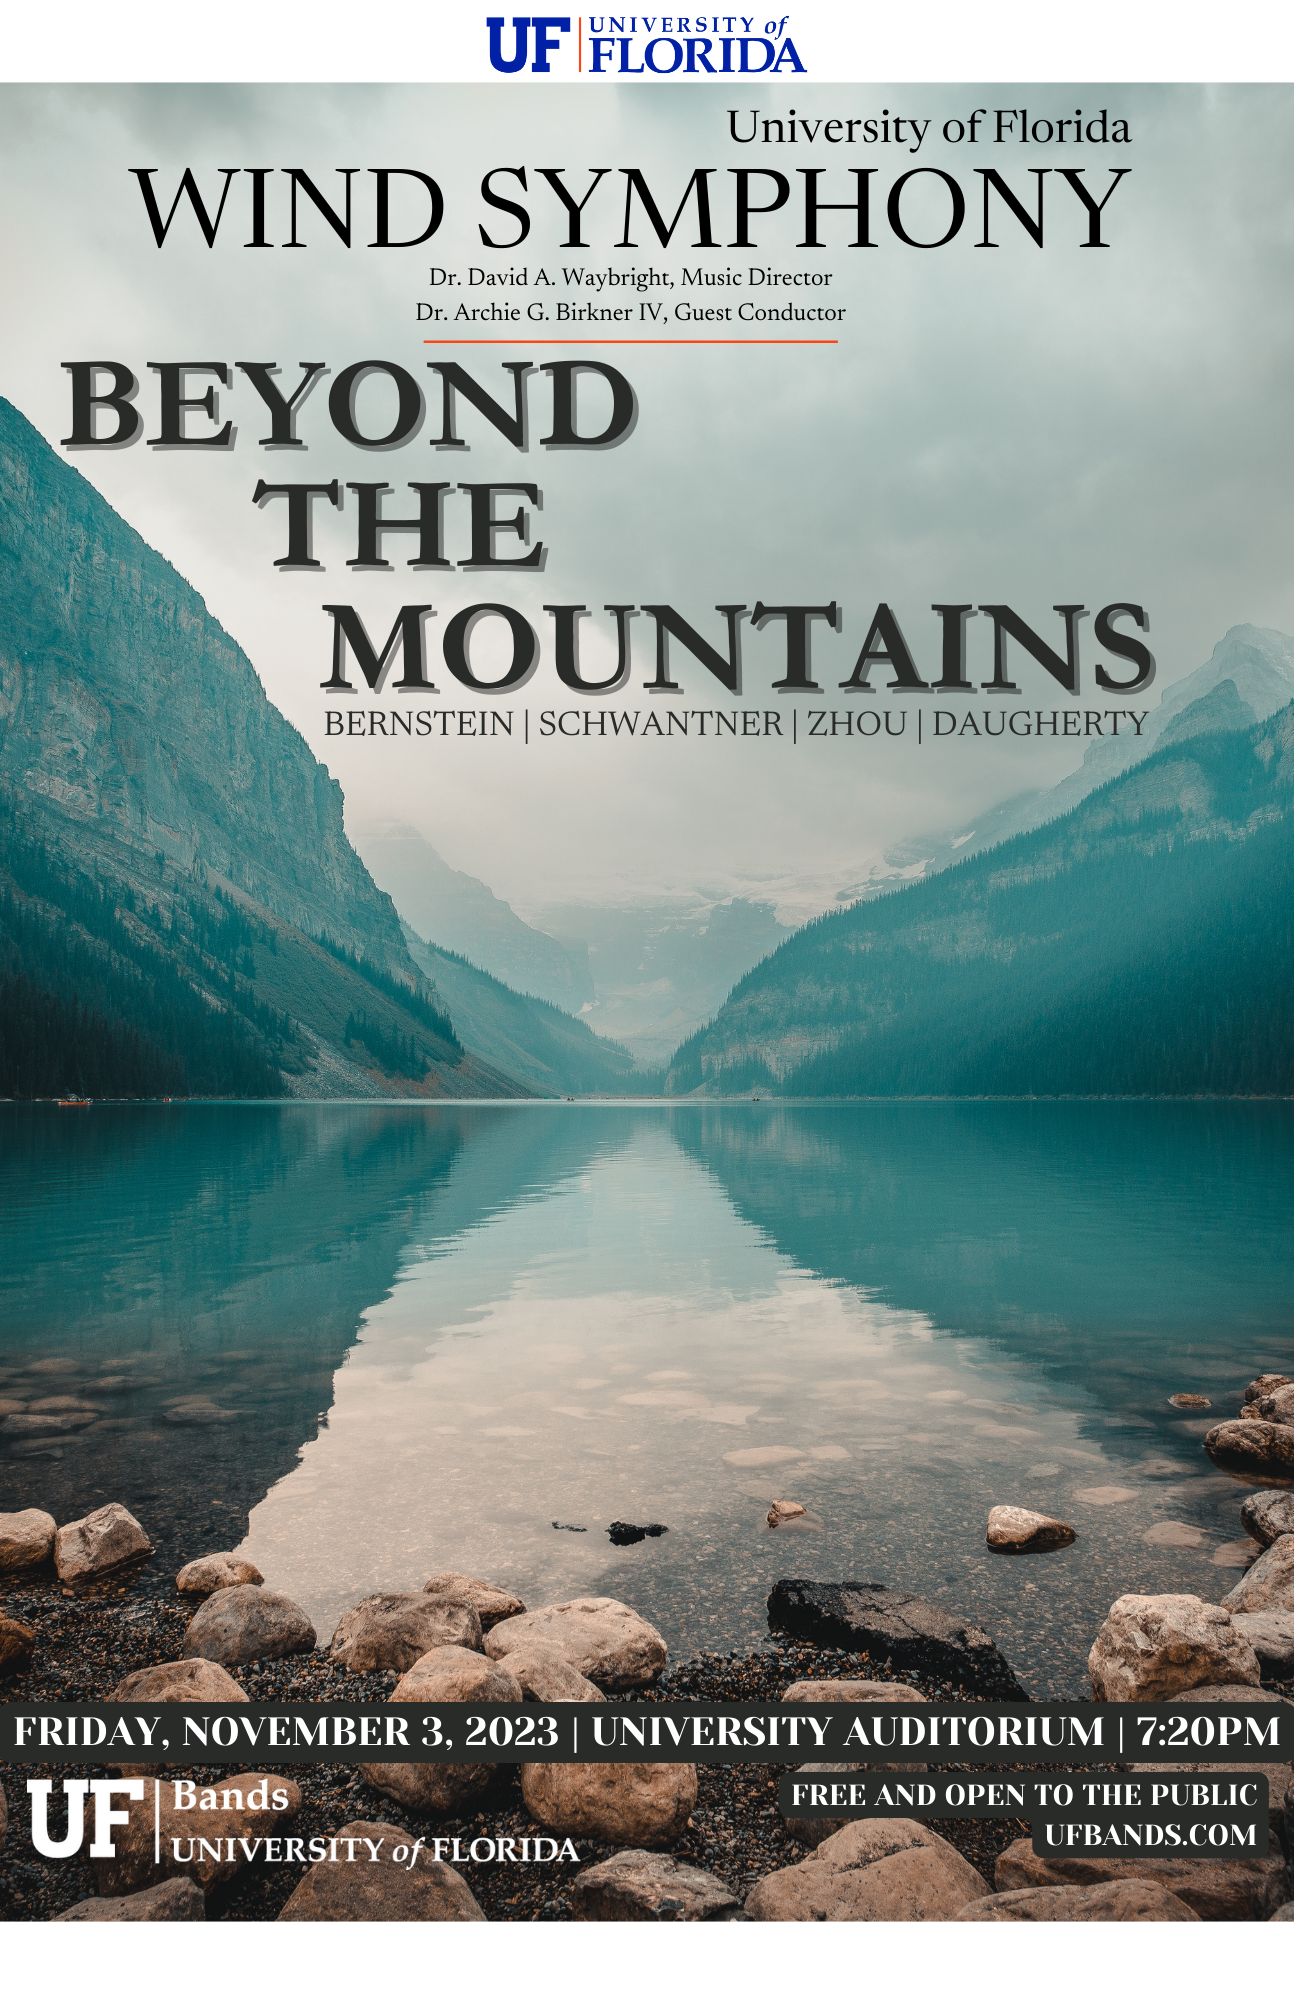 image of a mountain lake with text "beyond the mountains"